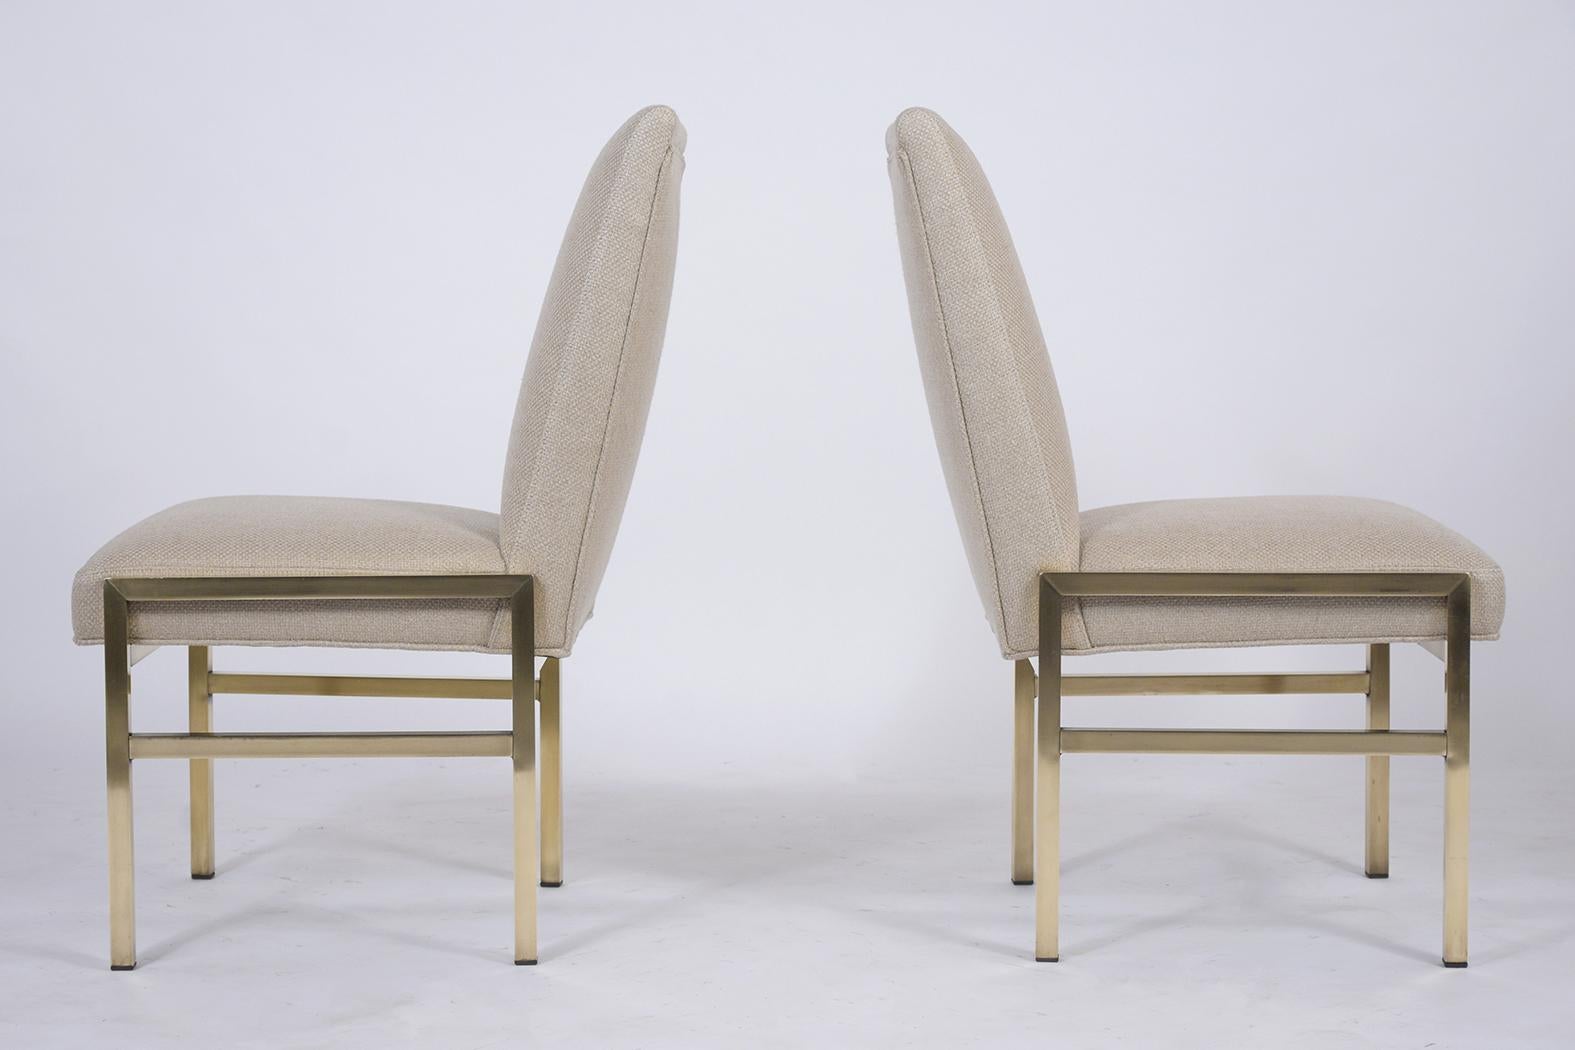 Discover the elegance of our Mastercraft mid-century modern brass side chairs, expertly restored to their original splendor. Crafted with robust brass frames that have been freshly polished, these chairs radiate a timeless charm. Newly upholstered